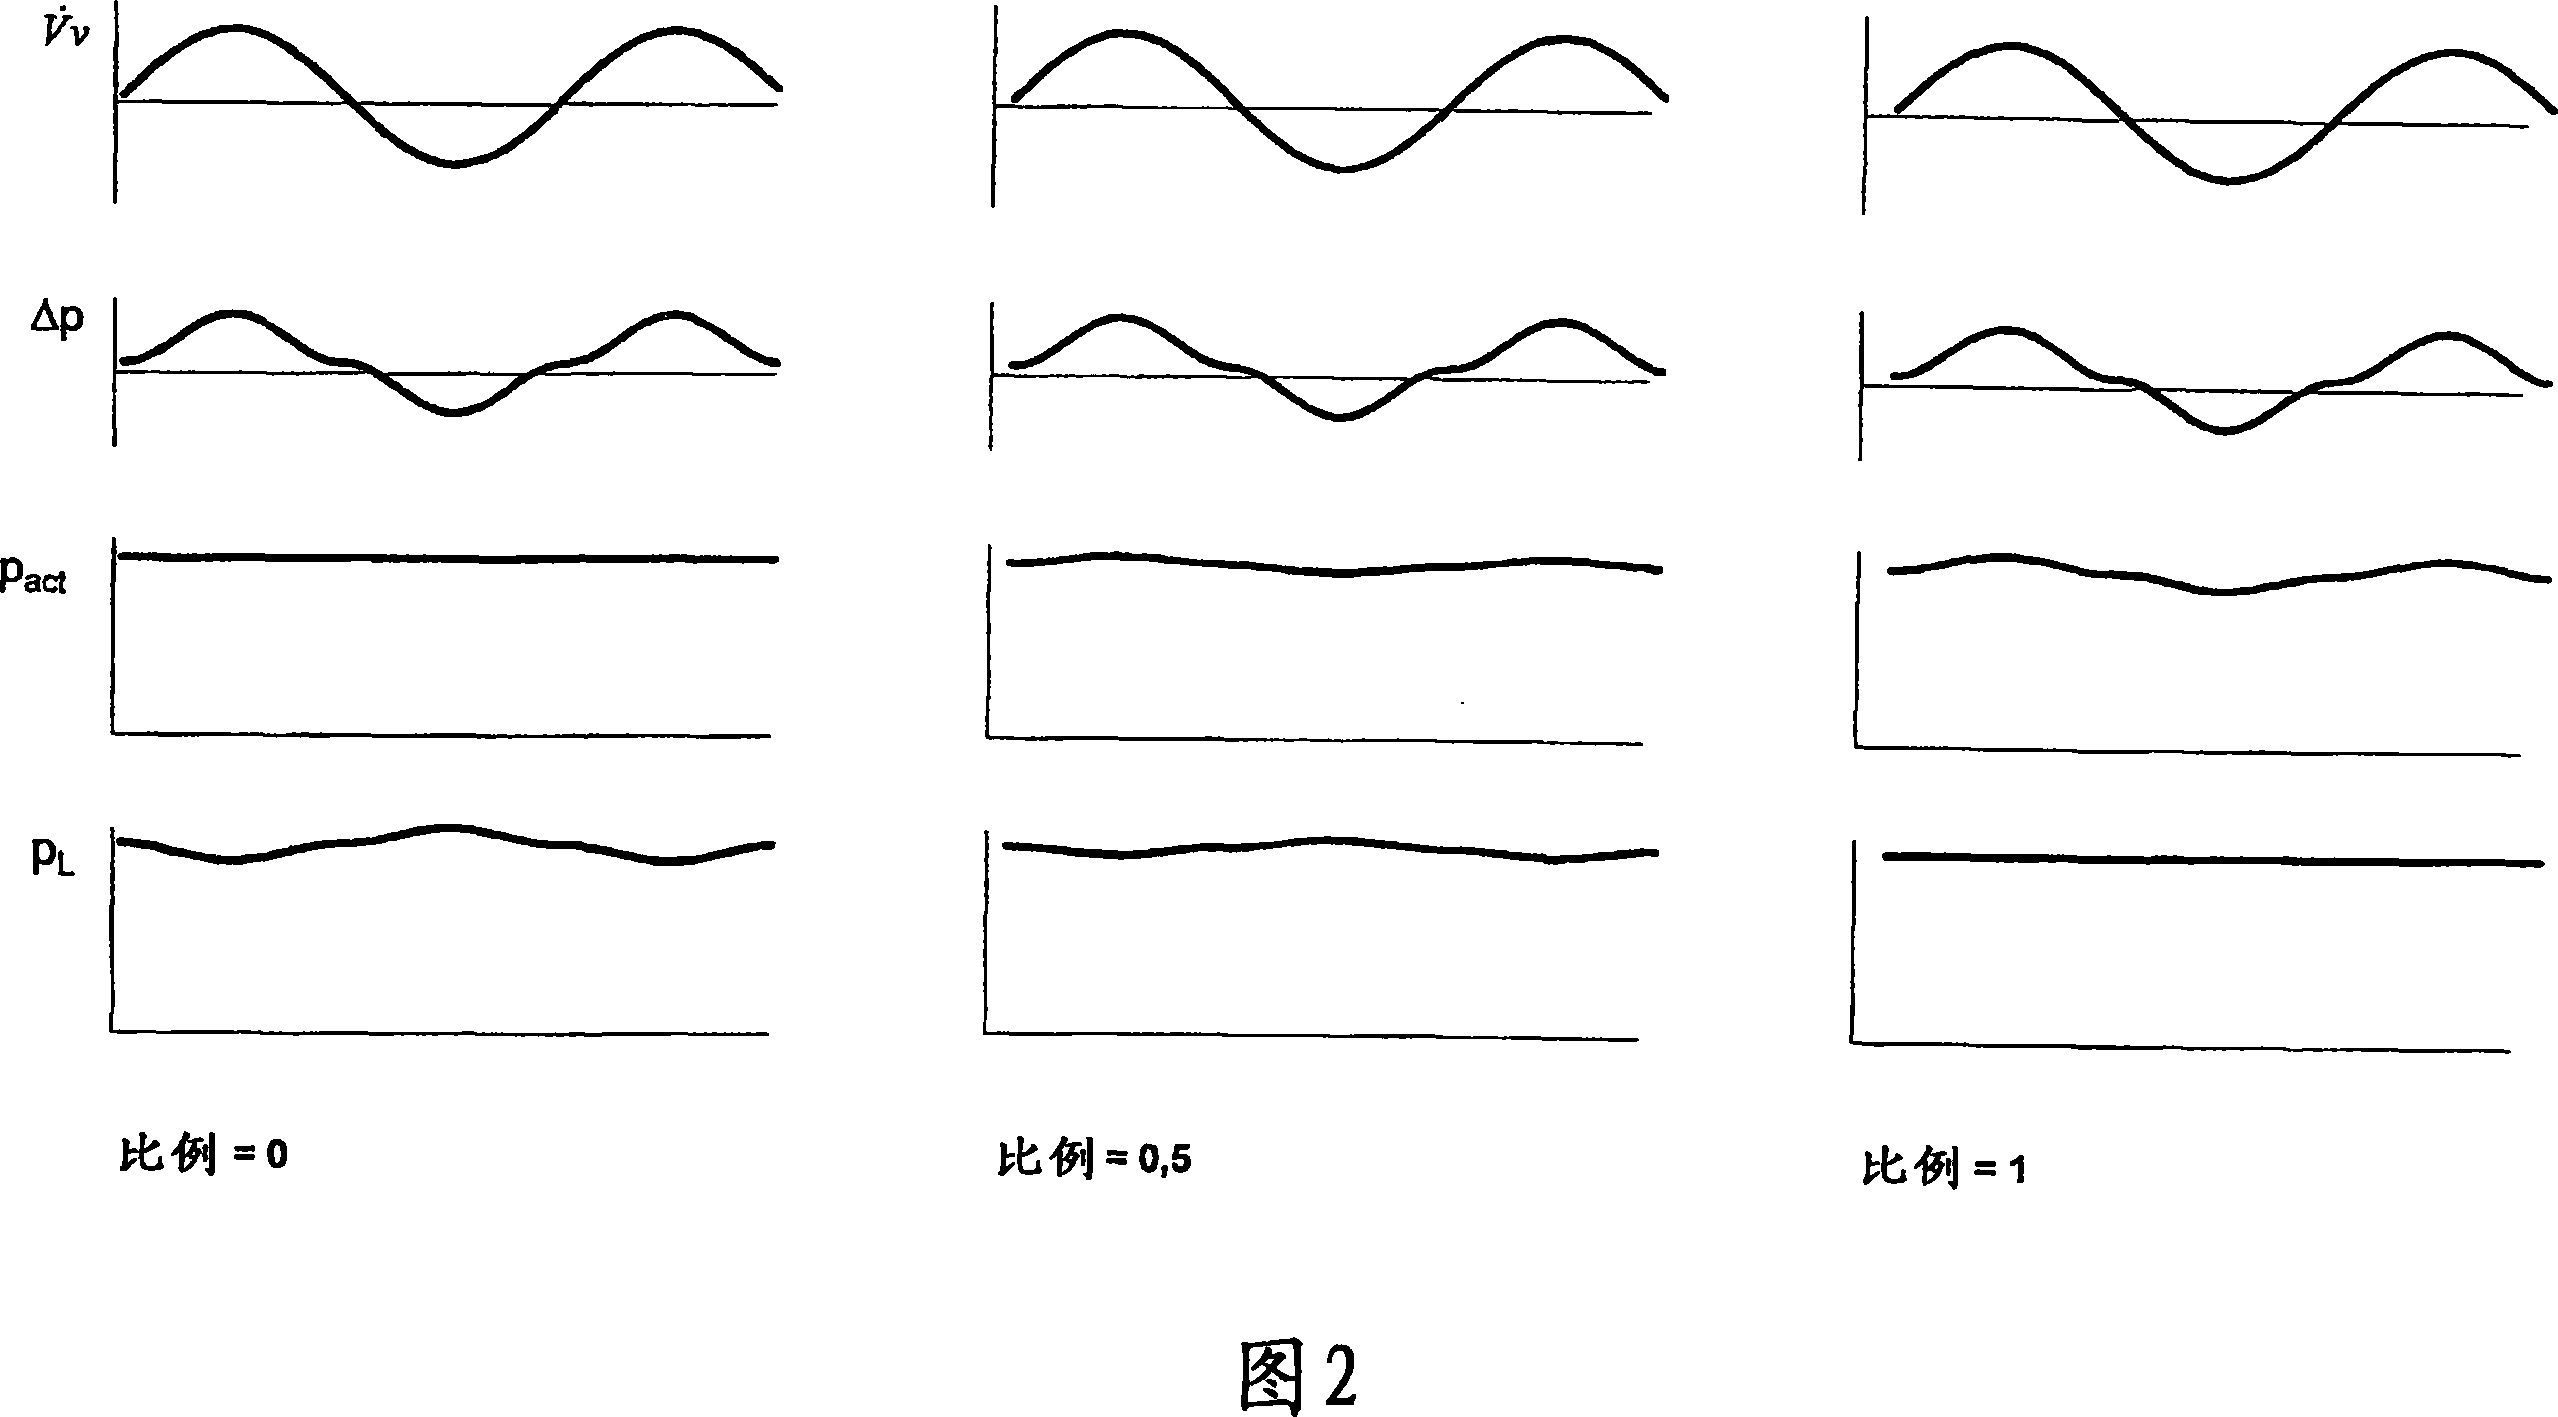 Ventilator device for treating obstructive sleep apnea and method for its control